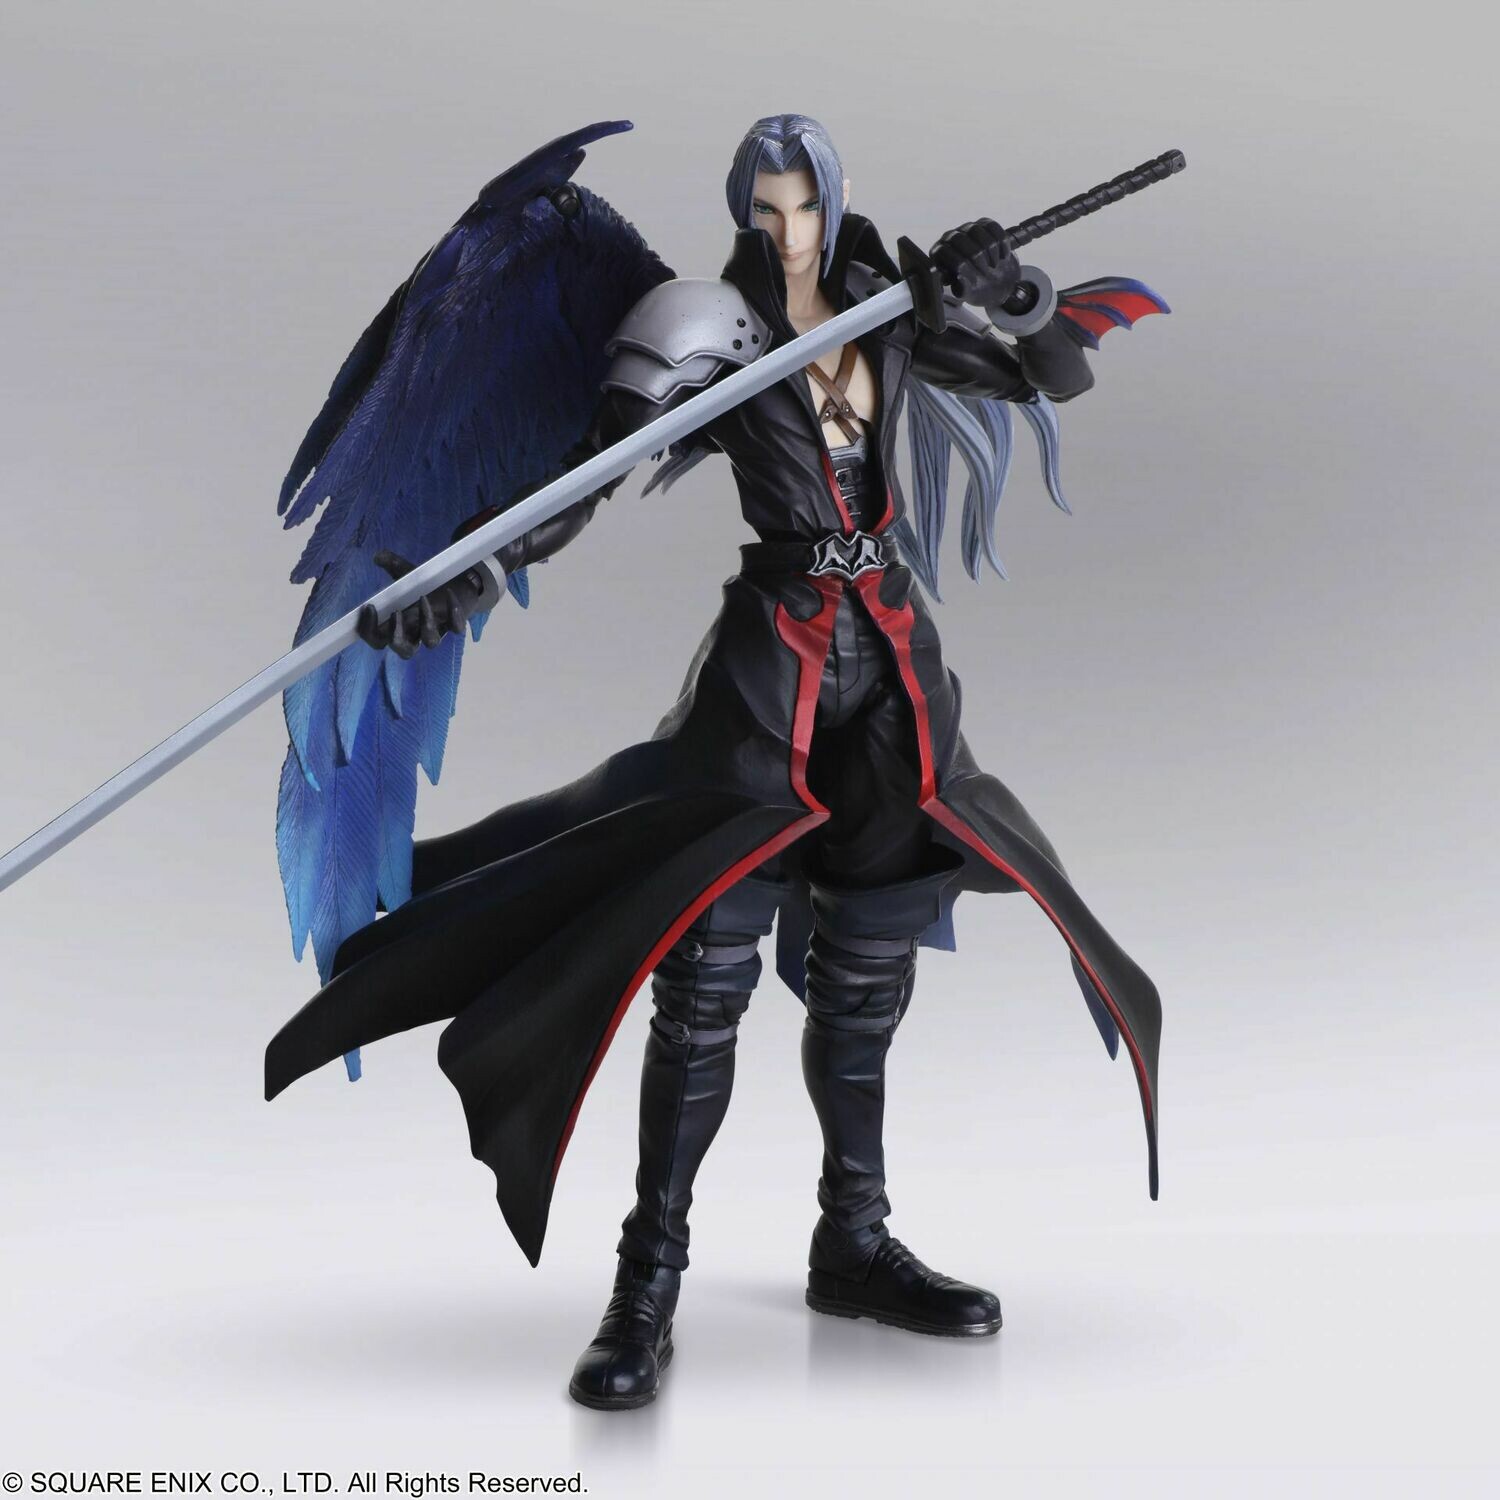 FINAL FANTASY BRING ARTS - SEPHIROTH (ANOTHER FORM VARIANT)